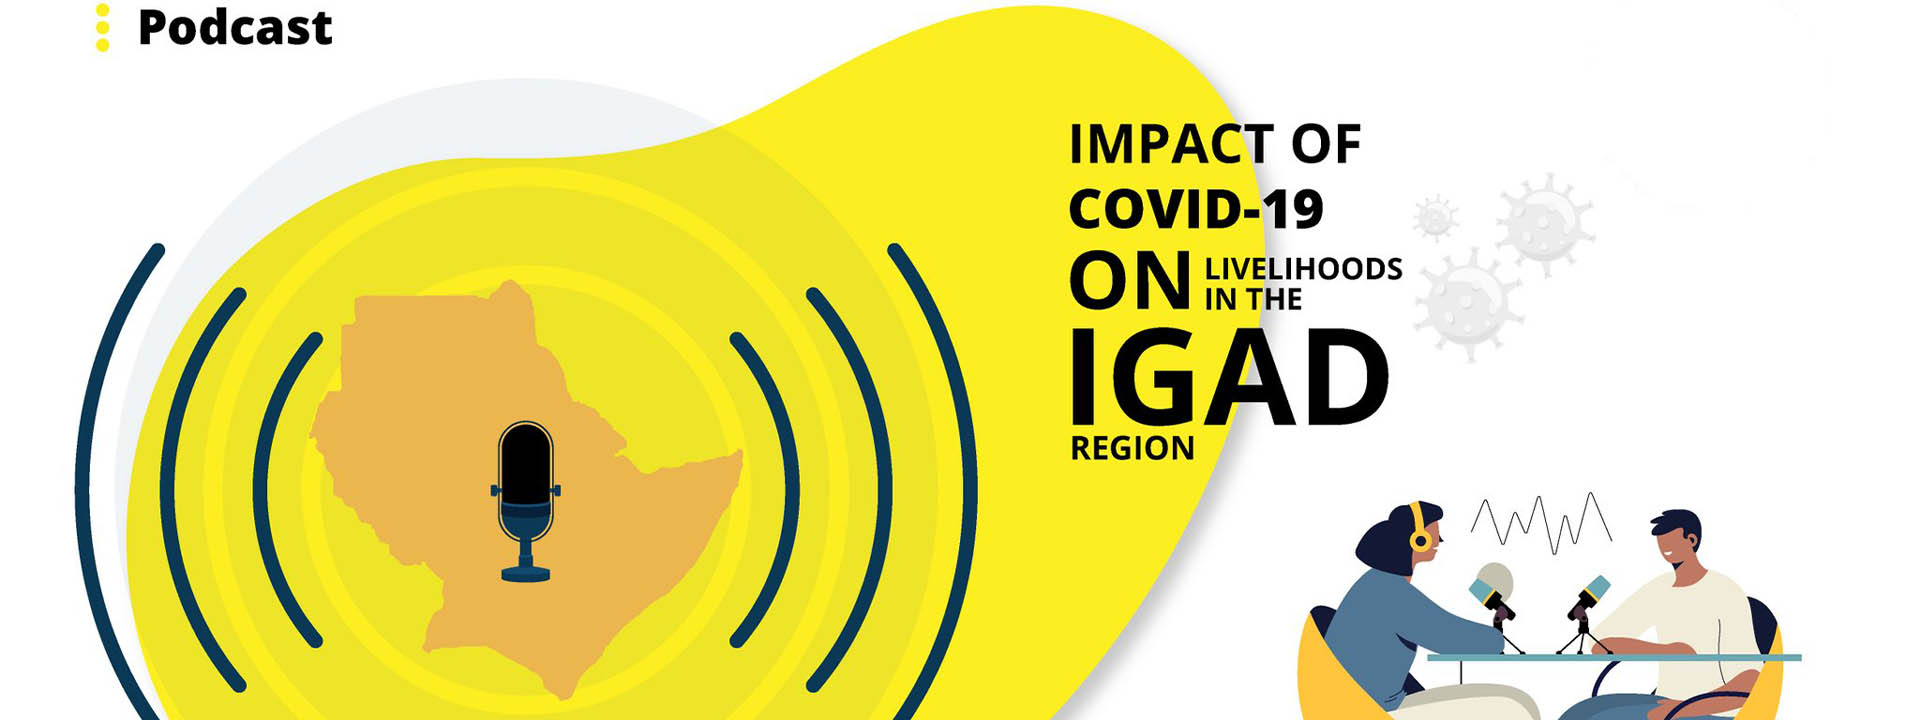 Impact of Covid-19 on Education systems in the IGAD region